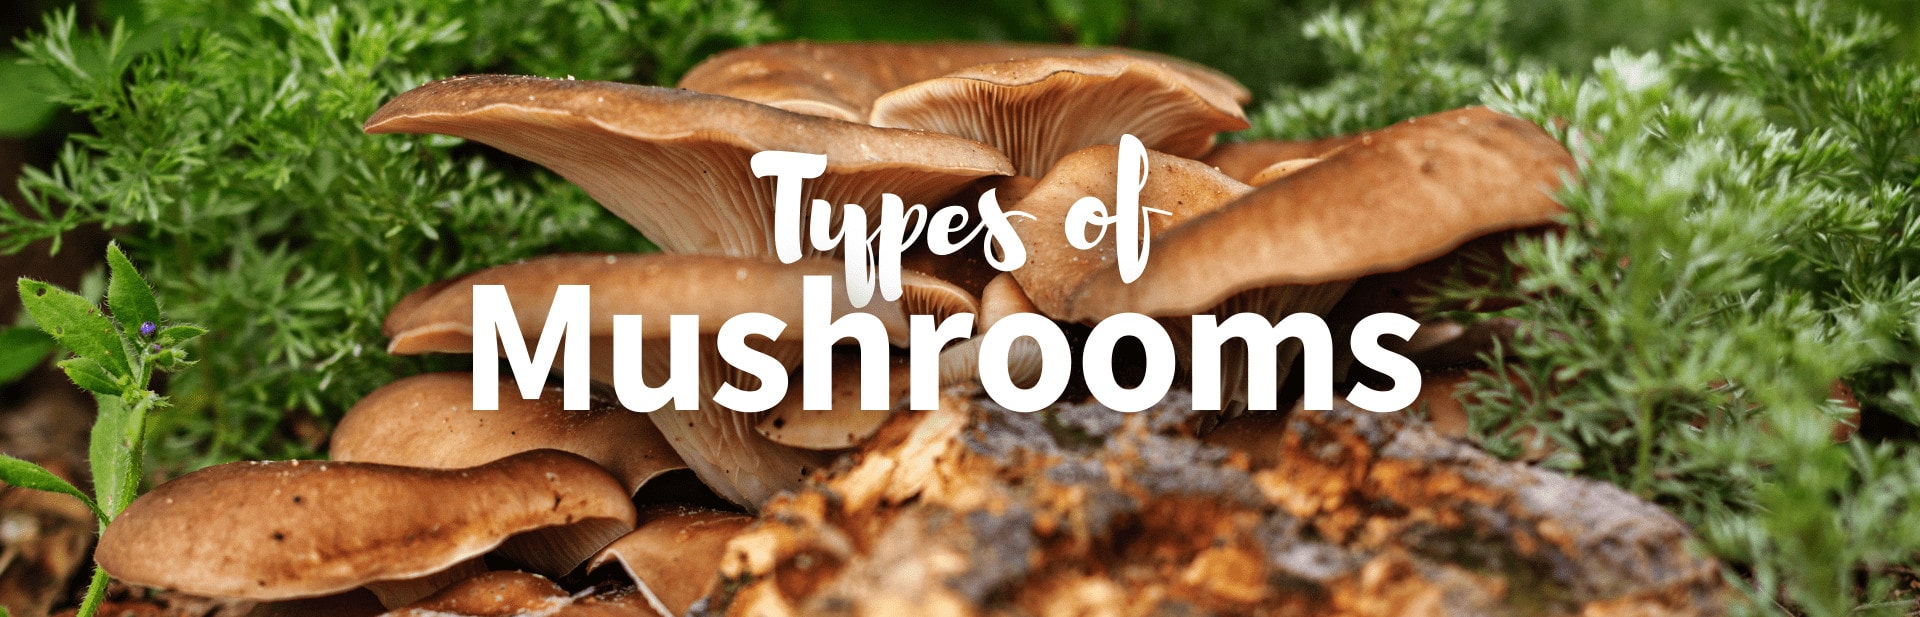 43 Different Types of Mushrooms: From Edible to Poisonous (Pictures and Chart)